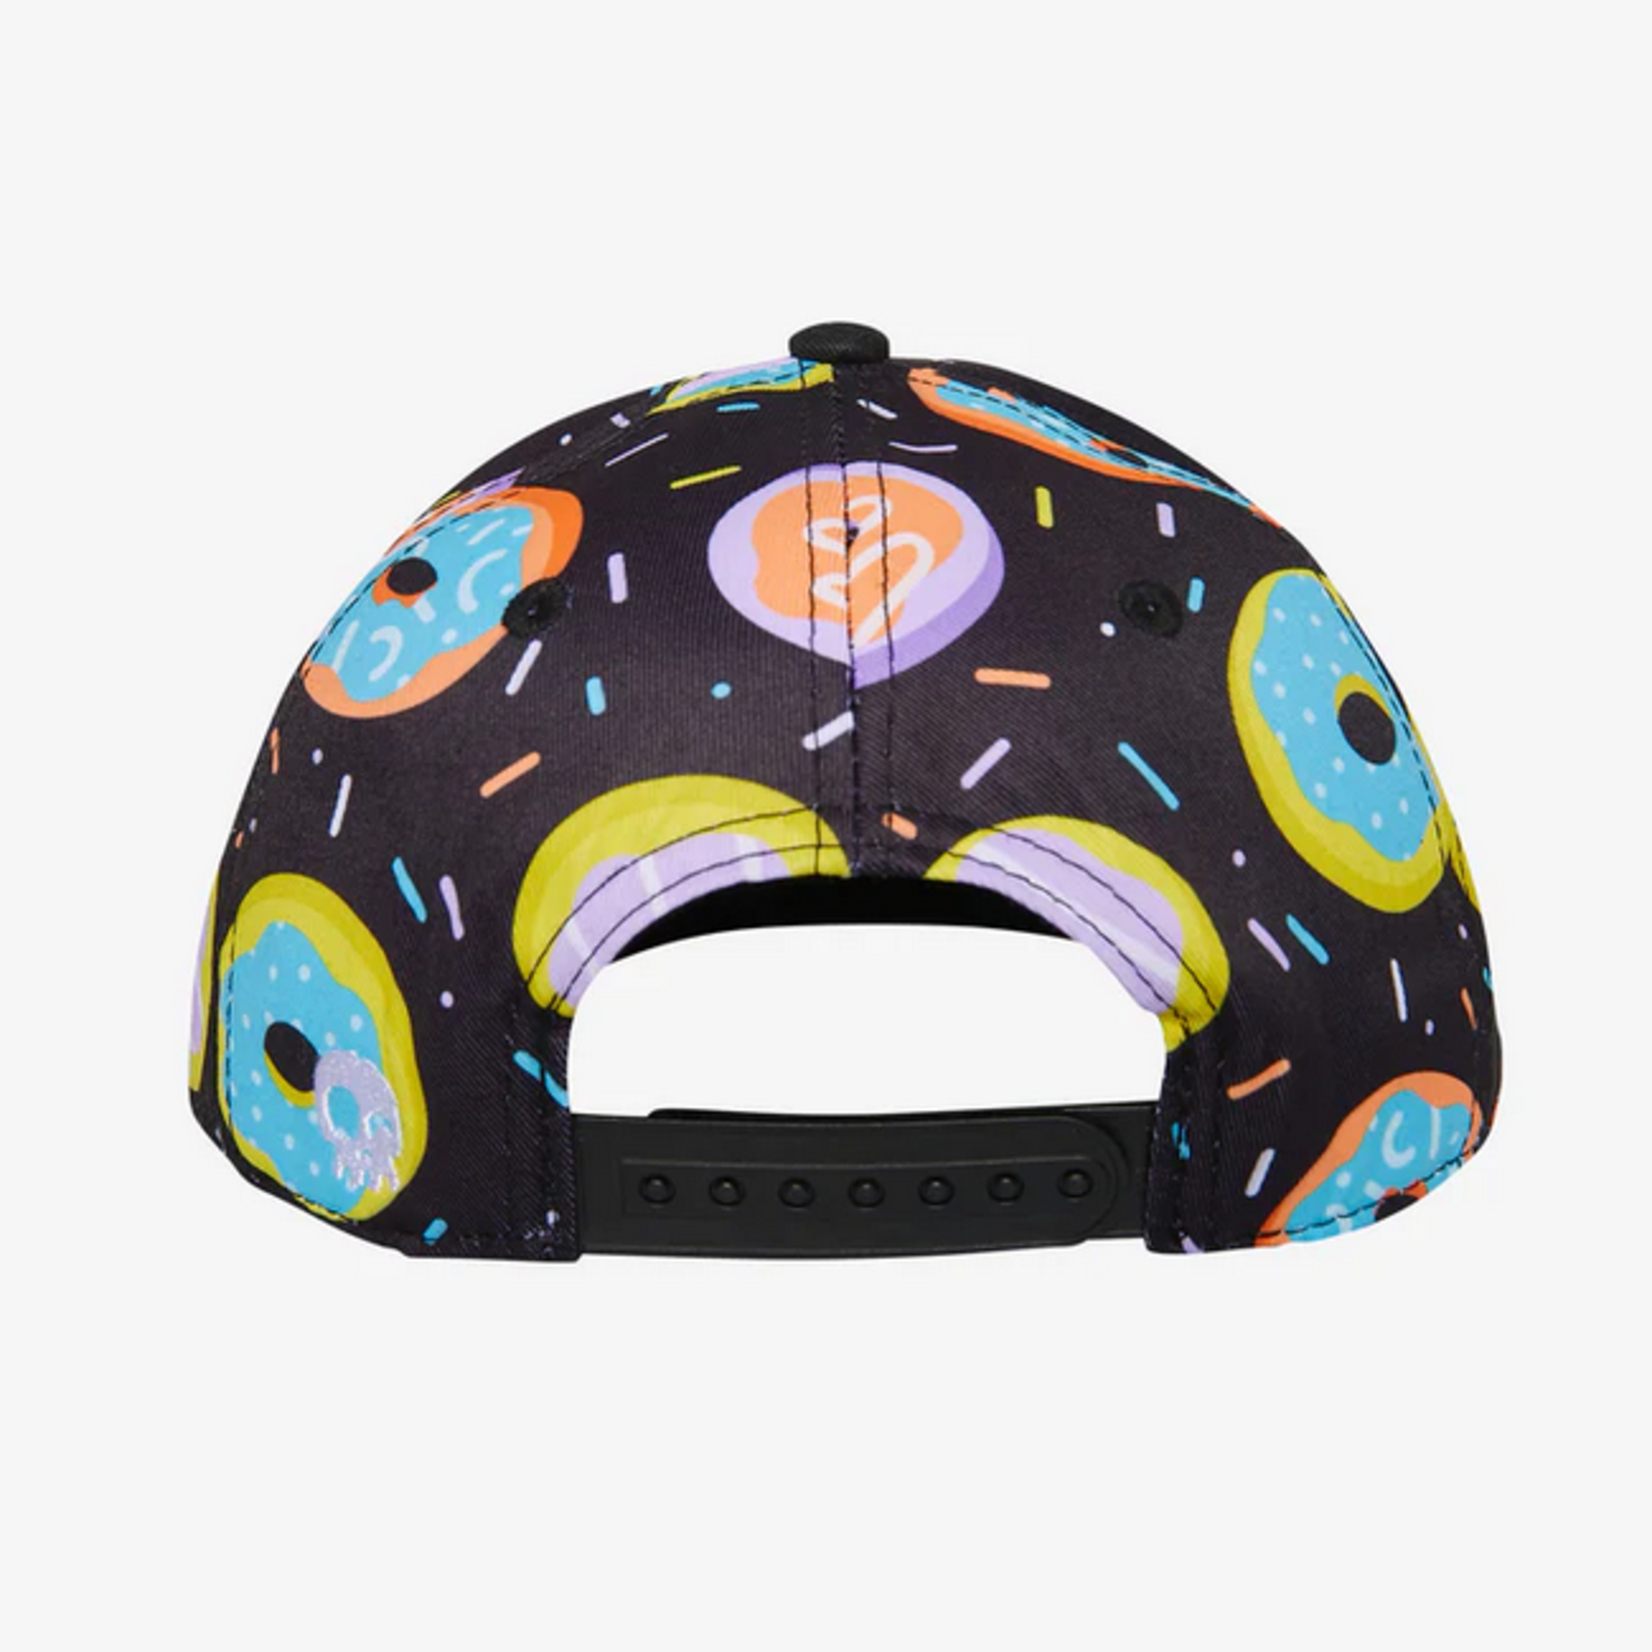 Headster HEADSTER SNAPBACK HATS DUH DONUT